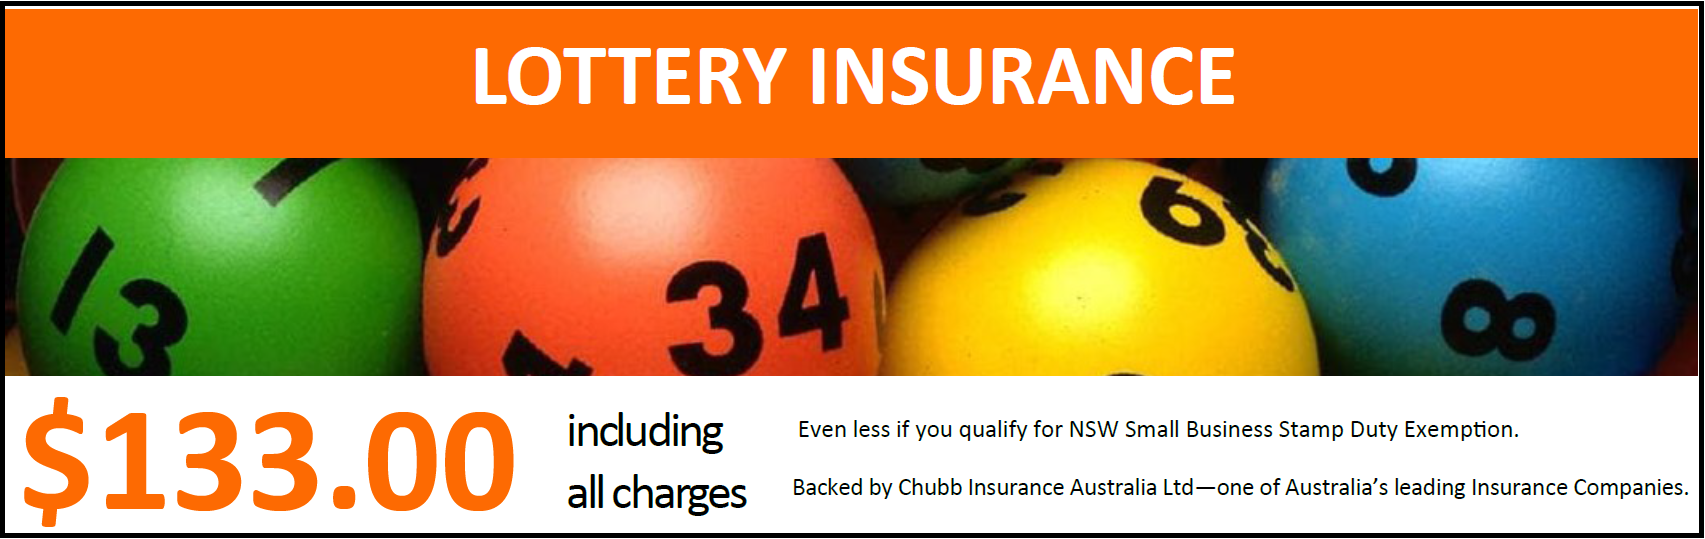 Lotteries Insurance confirmed at $133